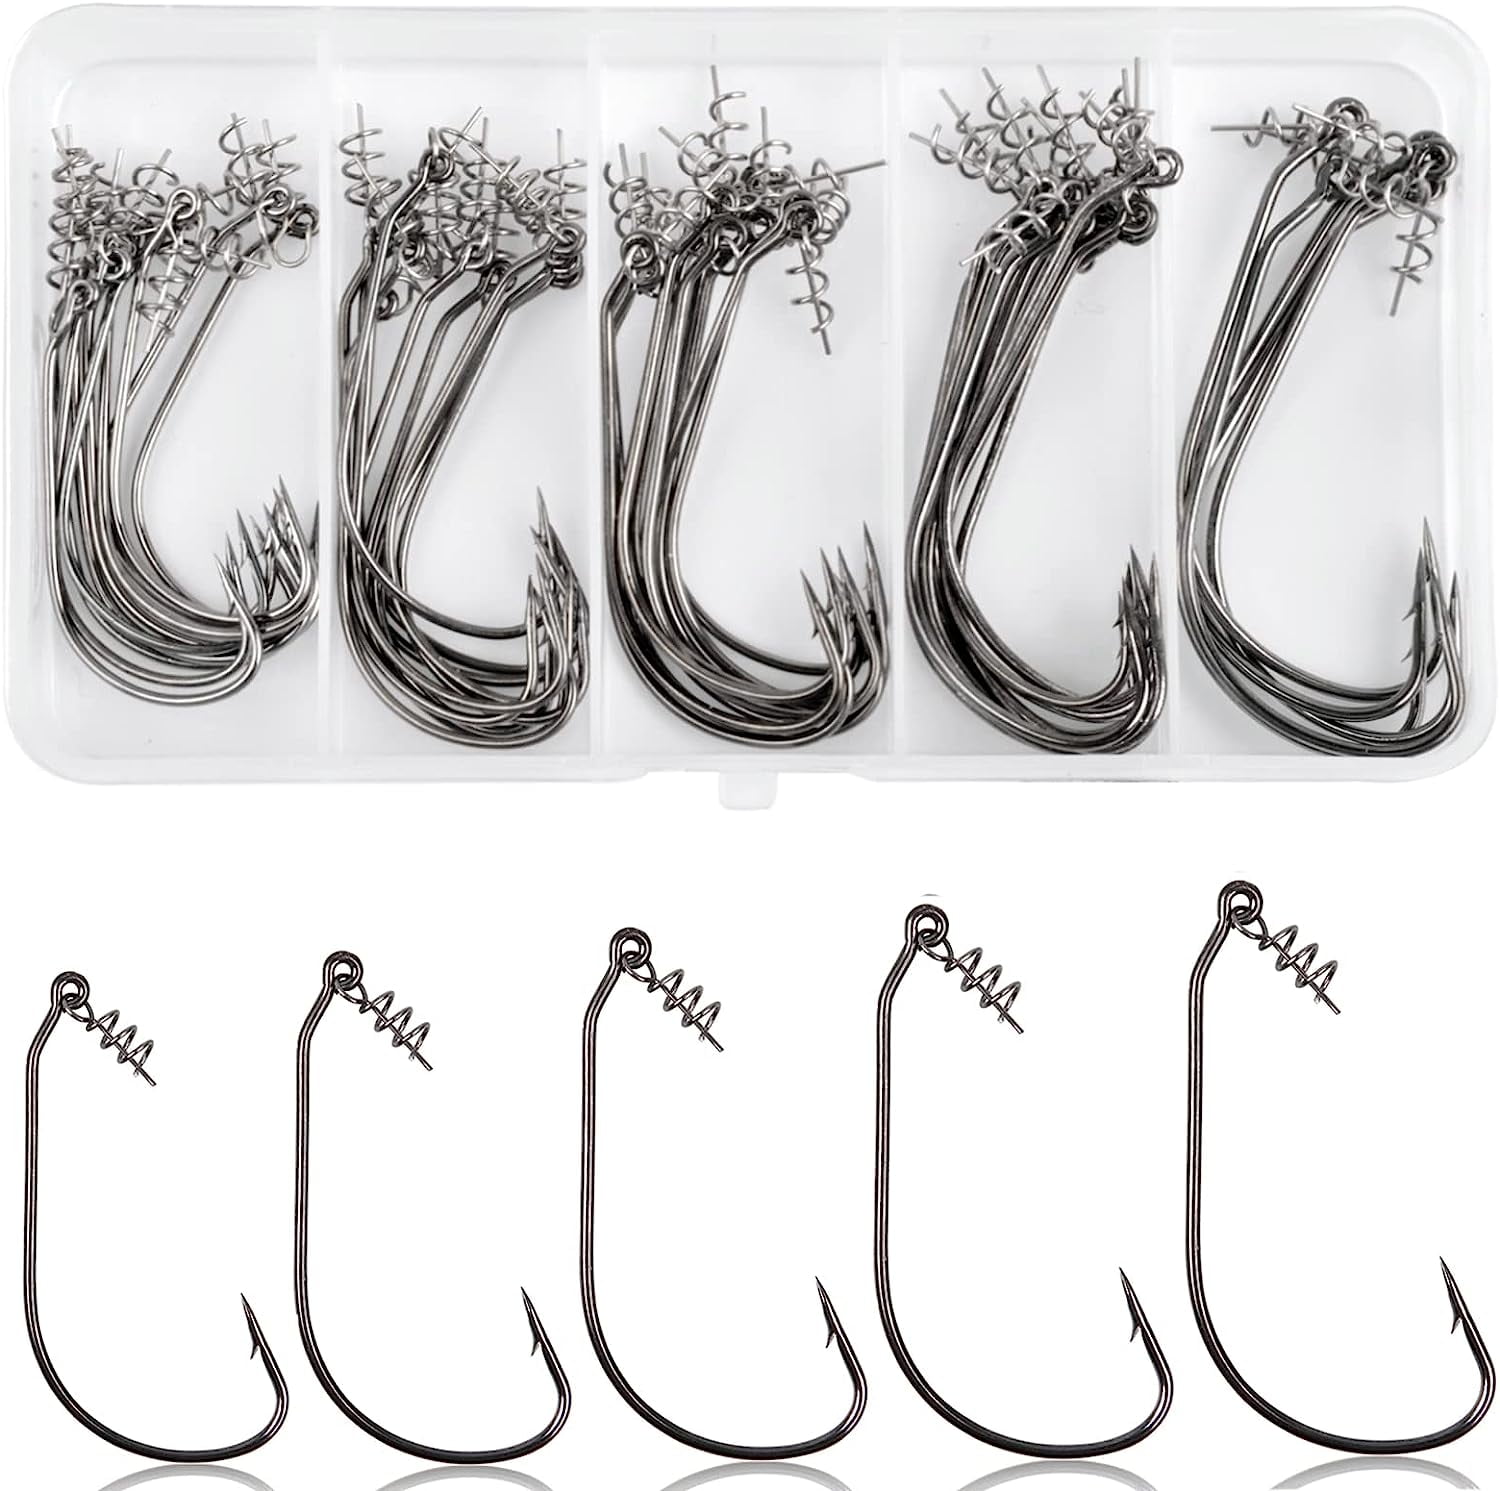 Spinpoler 100pc Spring Twist Lock Fishing Hook Protecting Bait Hold  Securely Fishing Worm Crank Centering Pin Soft Plastics Lure